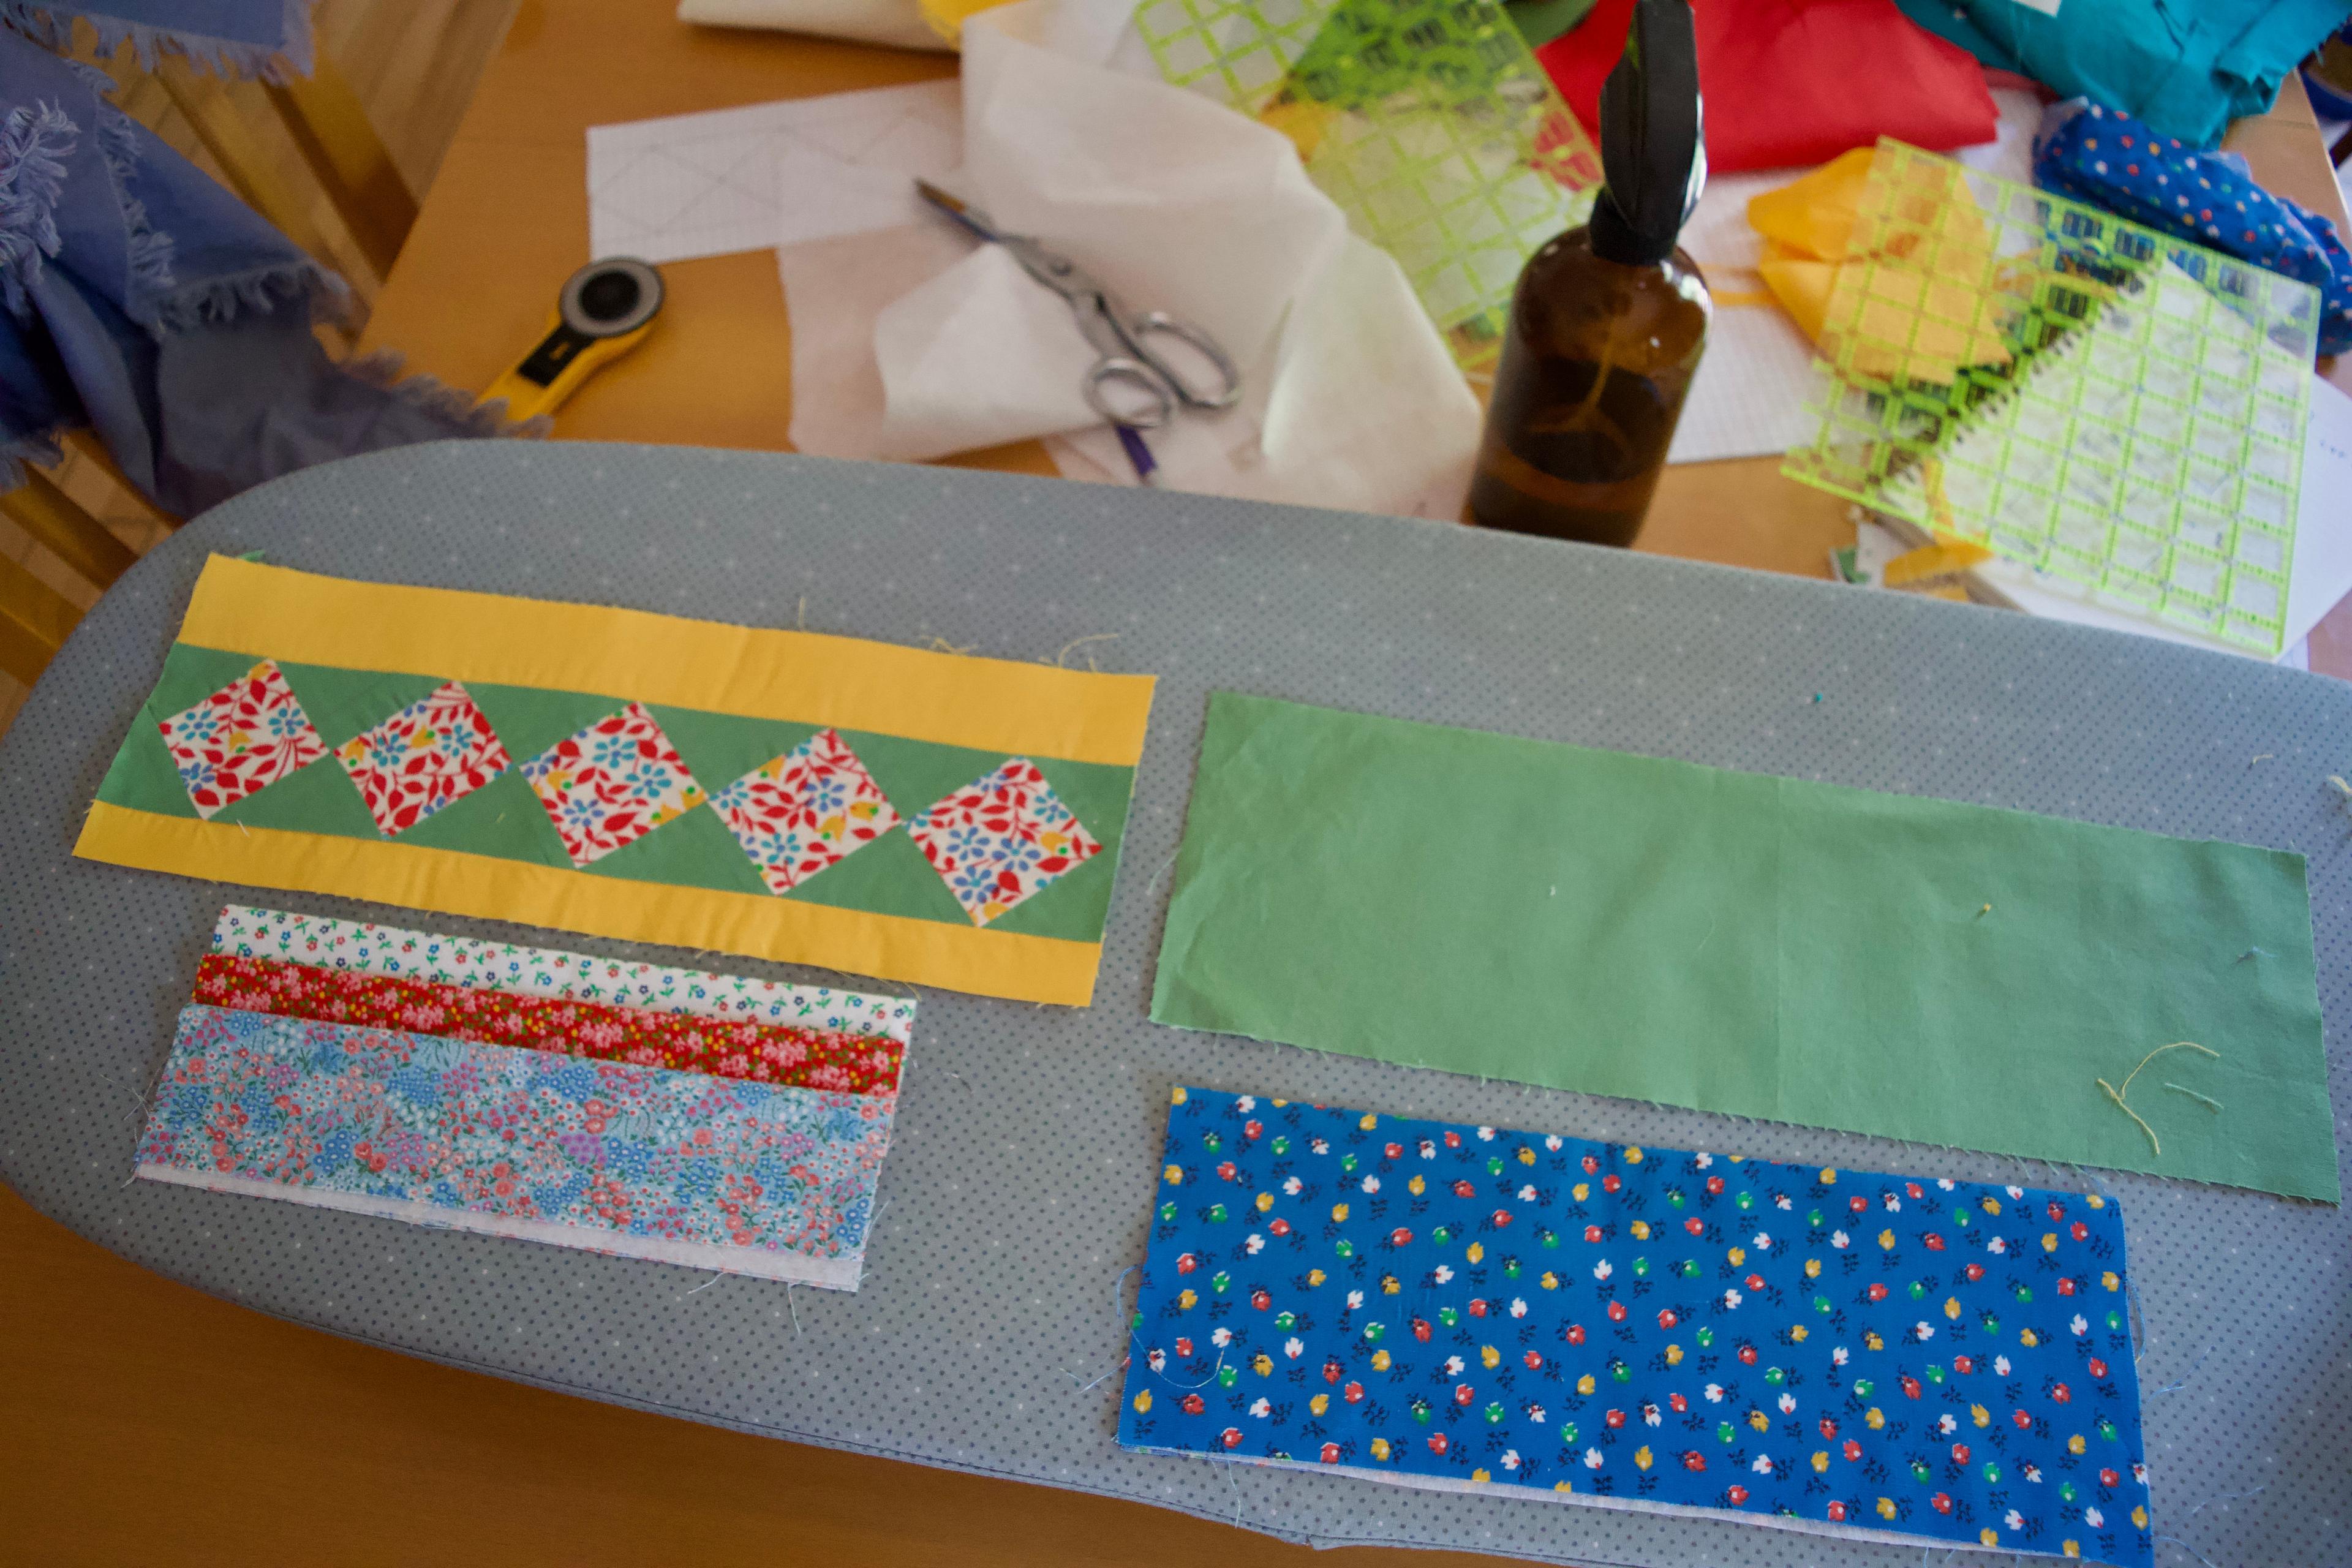 All of my pieces laid out on an ironing board - the outside patchwork piece included. There is a mess of fabrics, cutting utensils, and rulers on the table in the background.